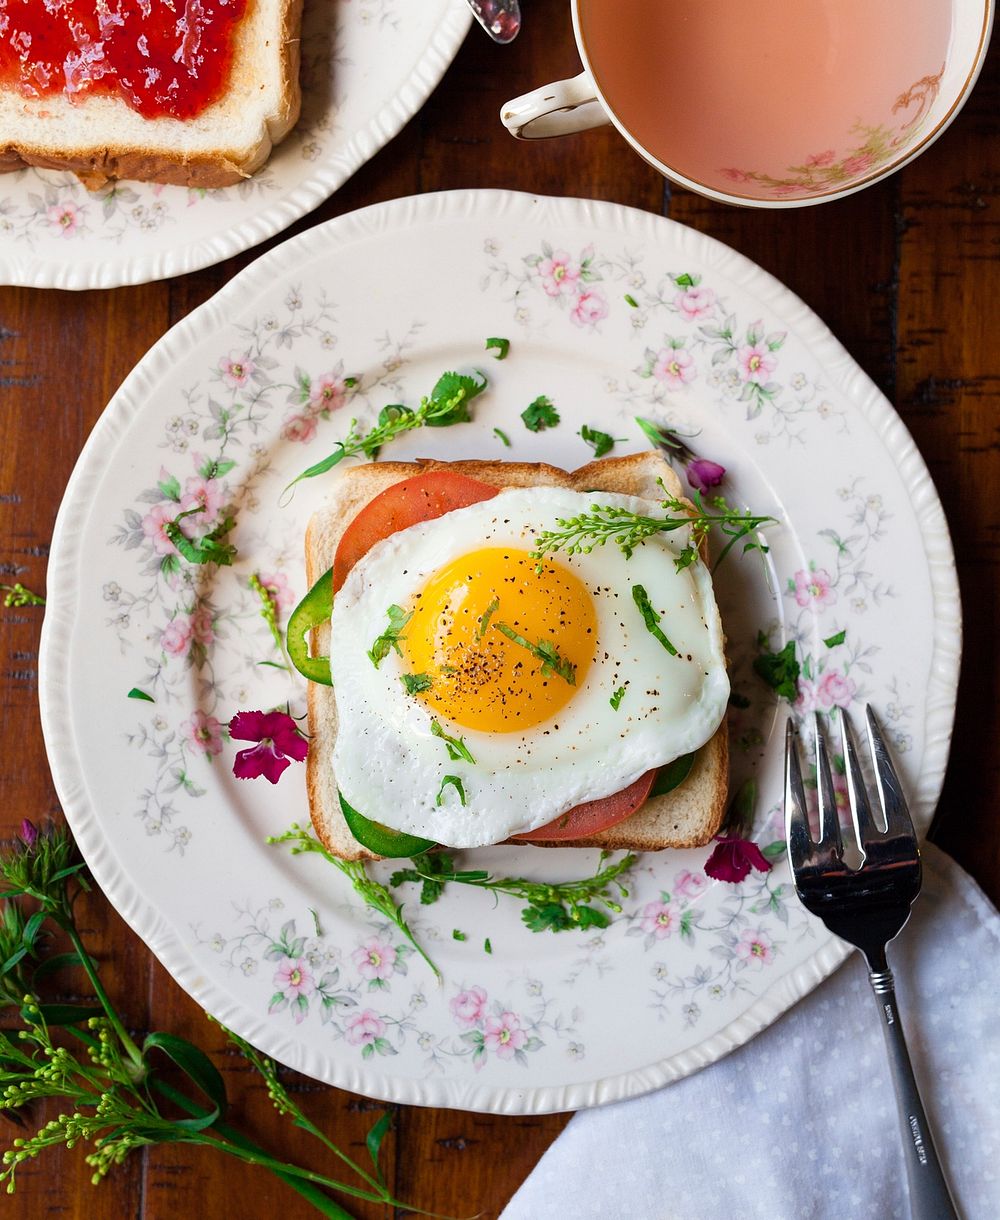 Breakfast toast with fried egg, tomato, and herbs. Original public domain image from Wikimedia Commons